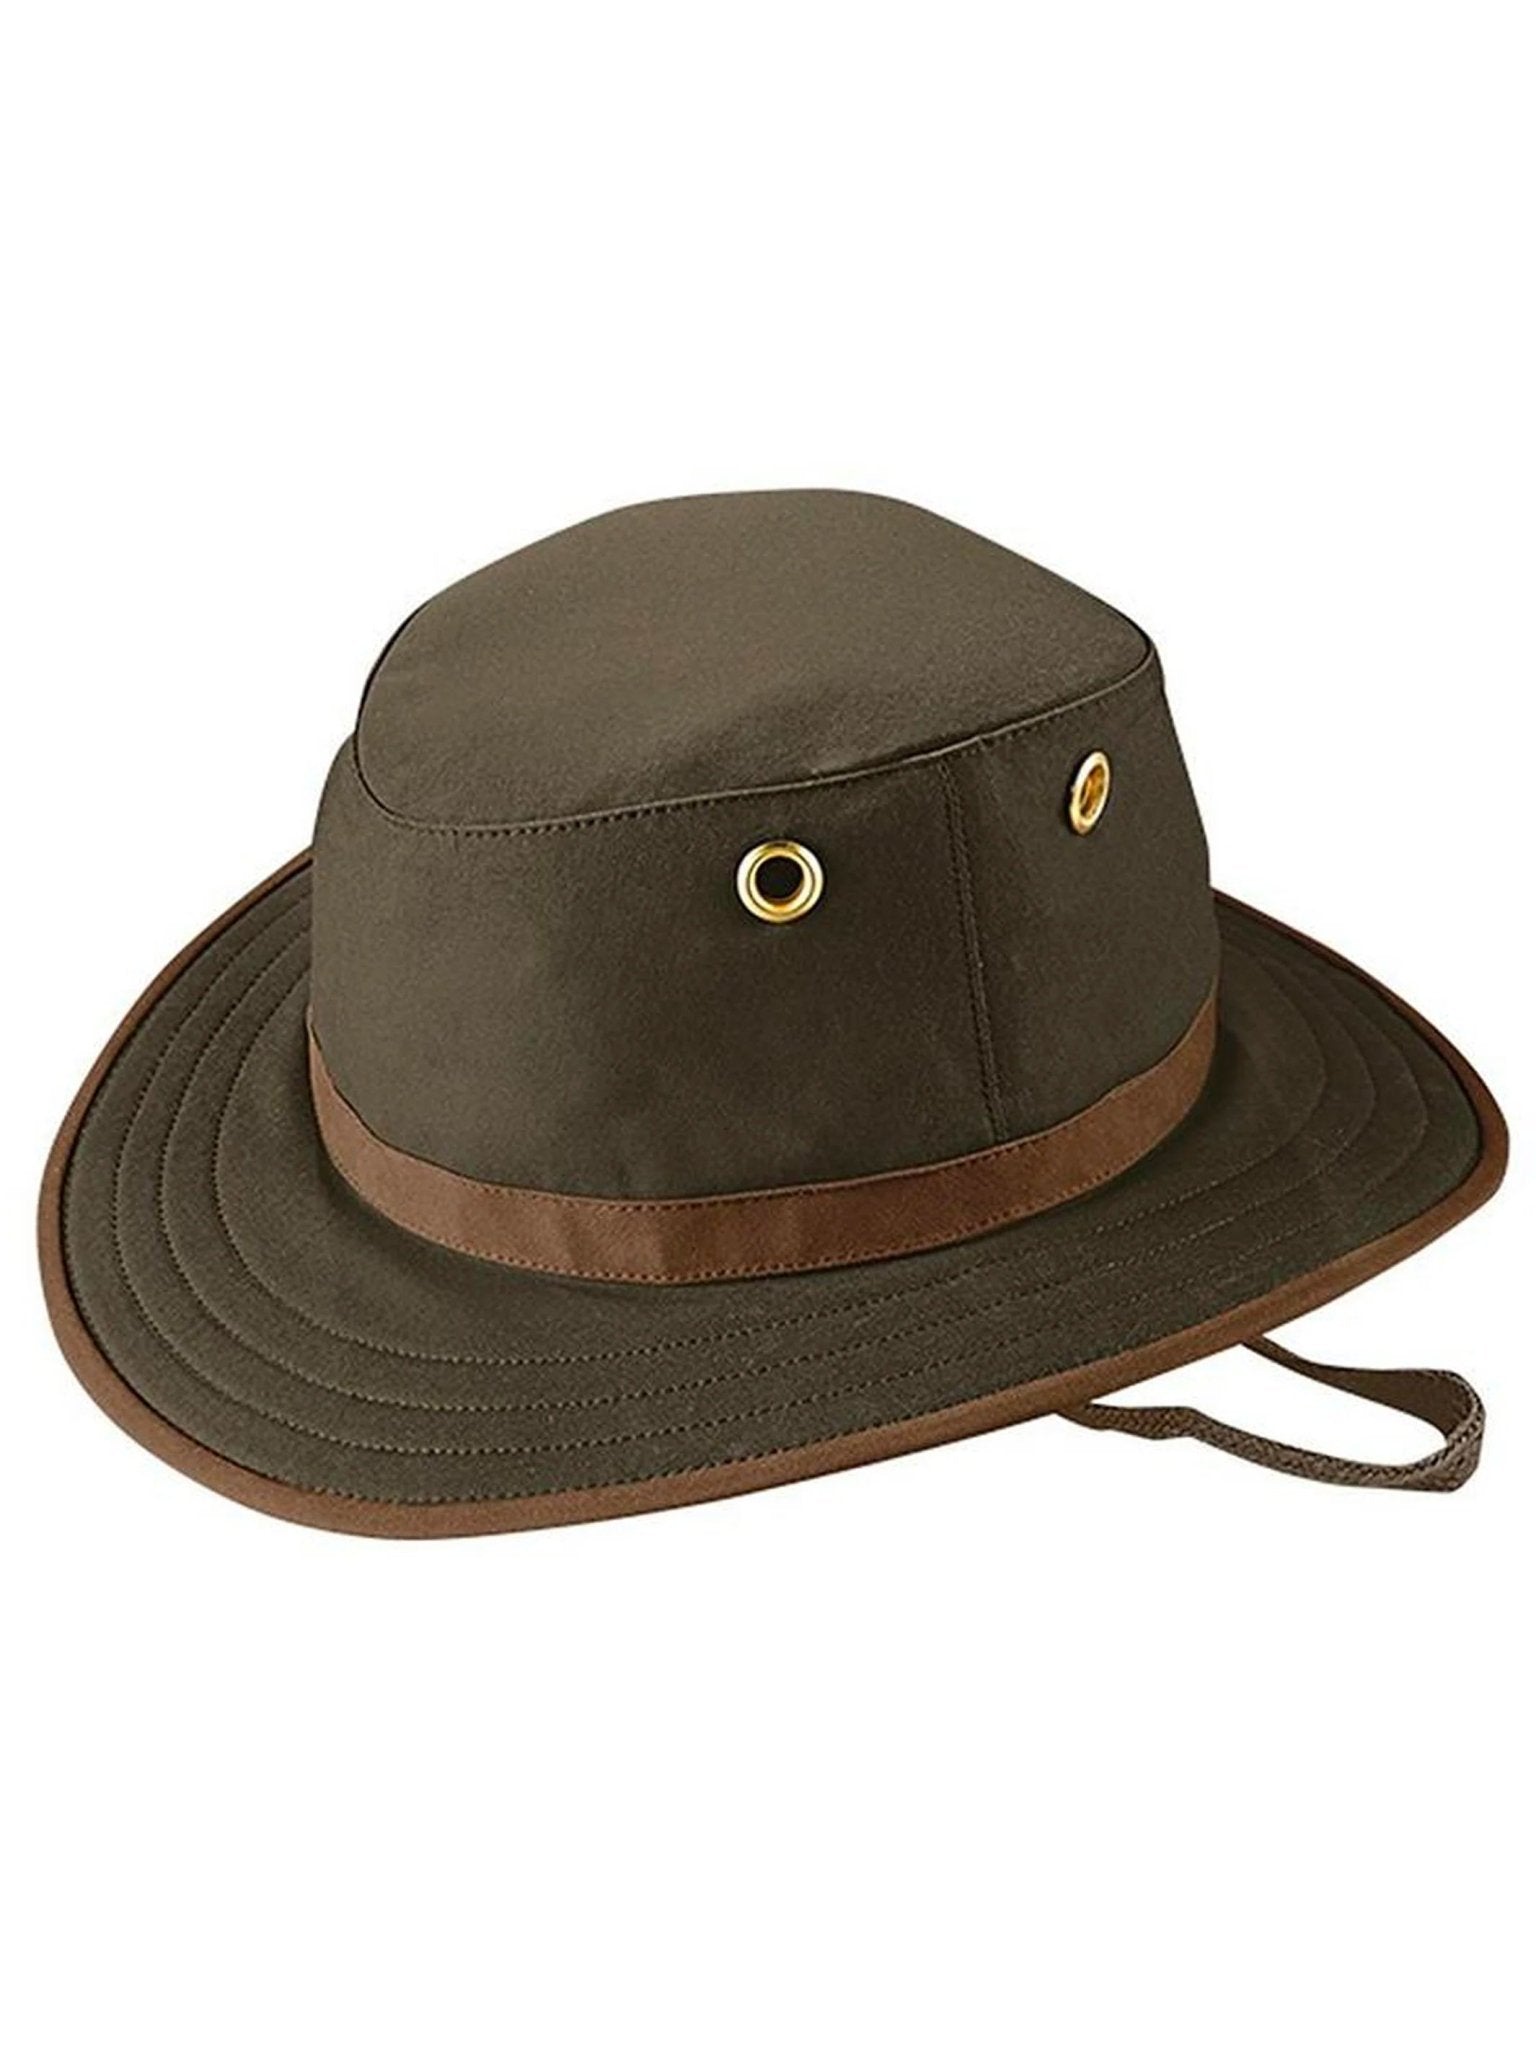 Tilley - The Classic Tilley T3 Duck Hat - 4elementsclothing, Tilley